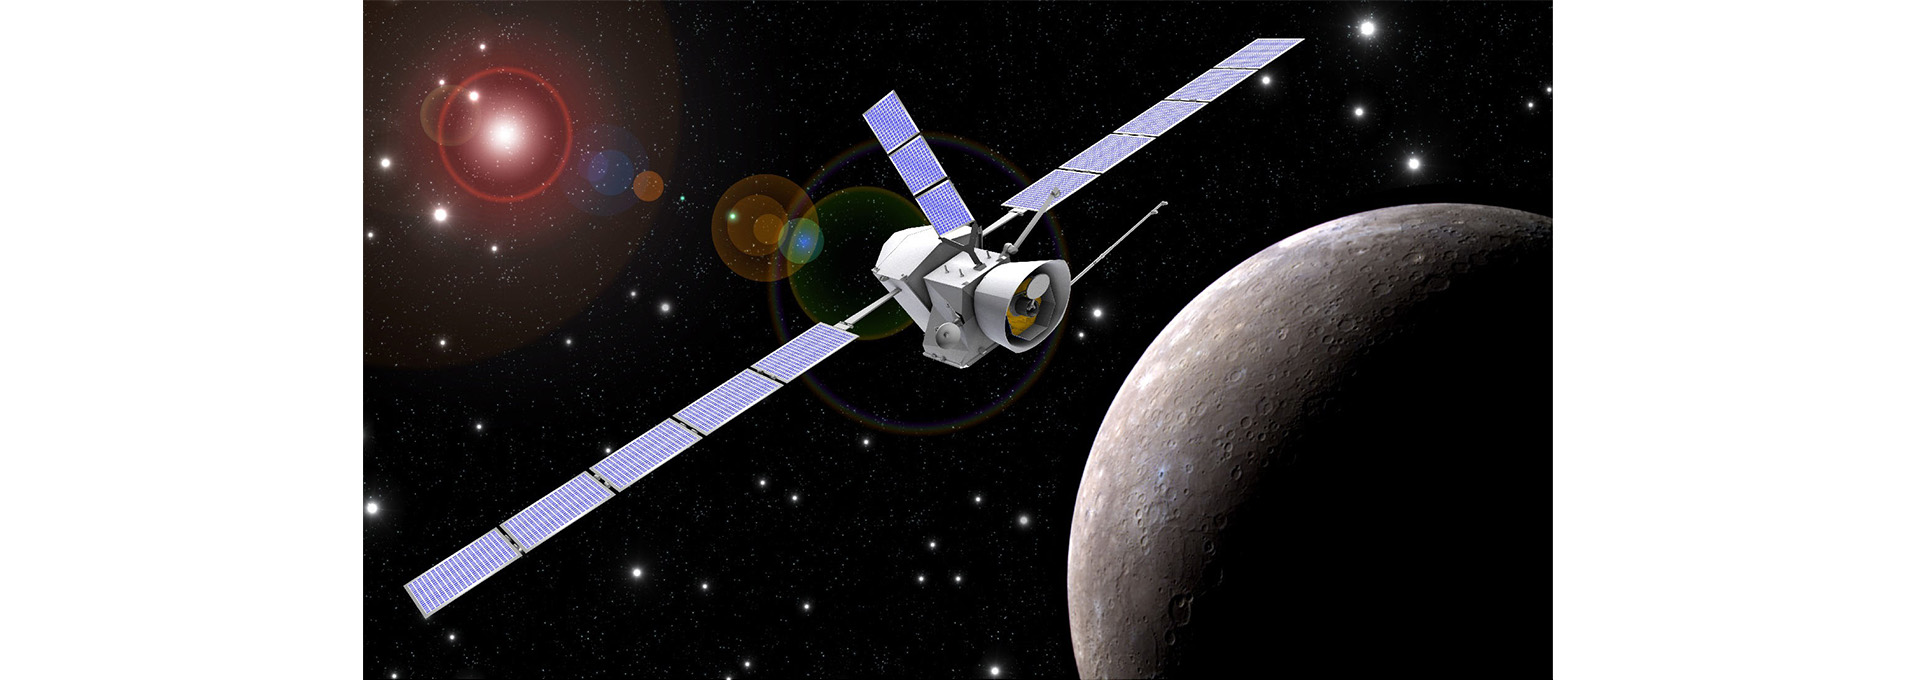 The BepiColombo space mission observed the leakage of oxygen and carbon from Venus